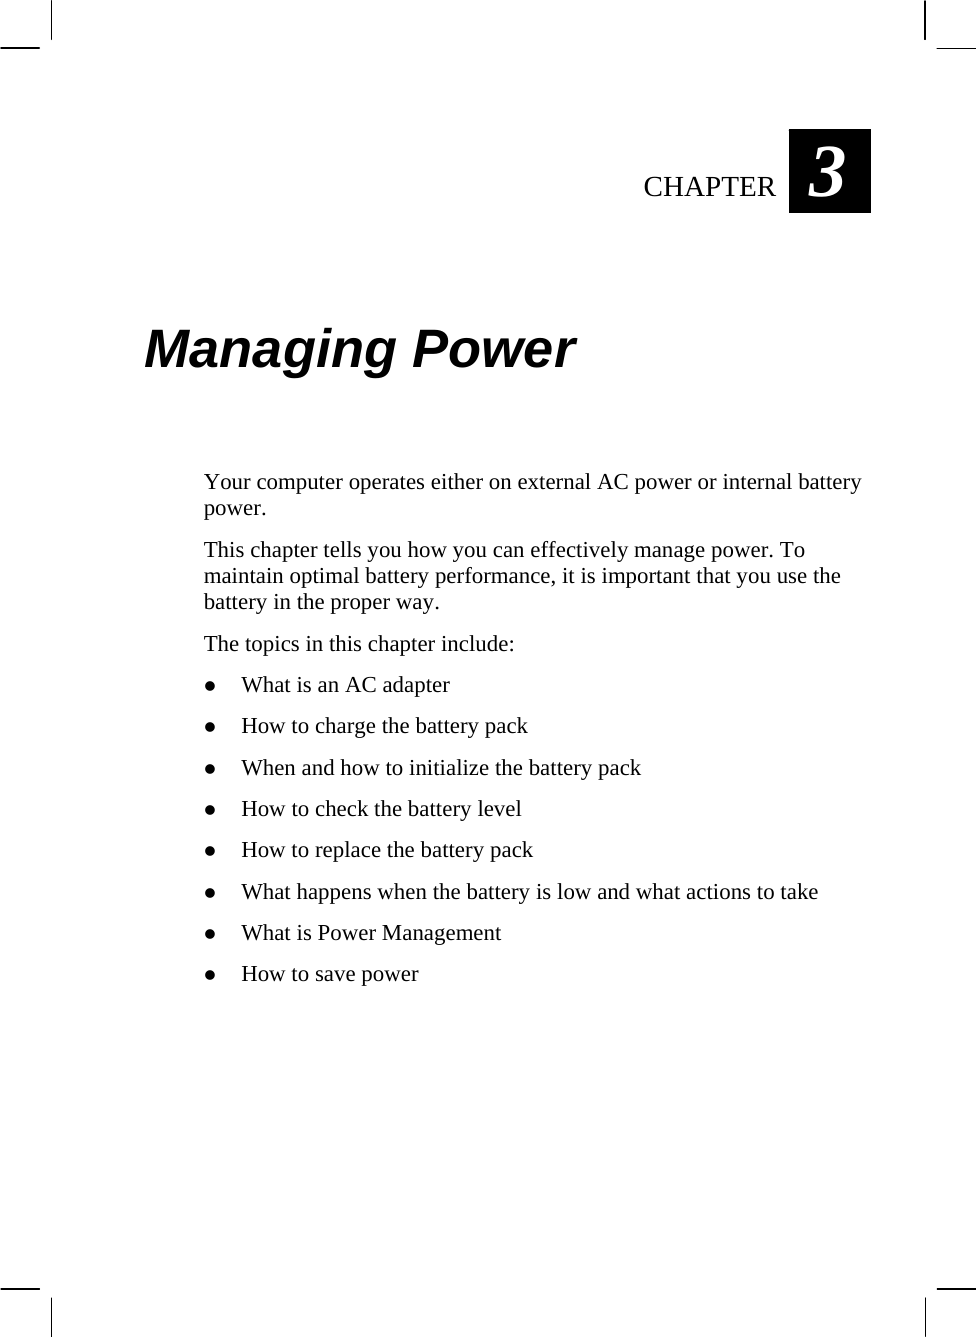  3CHAPTER   Managing Power Your computer operates either on external AC power or internal battery power. This chapter tells you how you can effectively manage power. To maintain optimal battery performance, it is important that you use the battery in the proper way. The topics in this chapter include: z What is an AC adapter z How to charge the battery pack z When and how to initialize the battery pack z How to check the battery level z How to replace the battery pack z What happens when the battery is low and what actions to take z What is Power Management z How to save power  